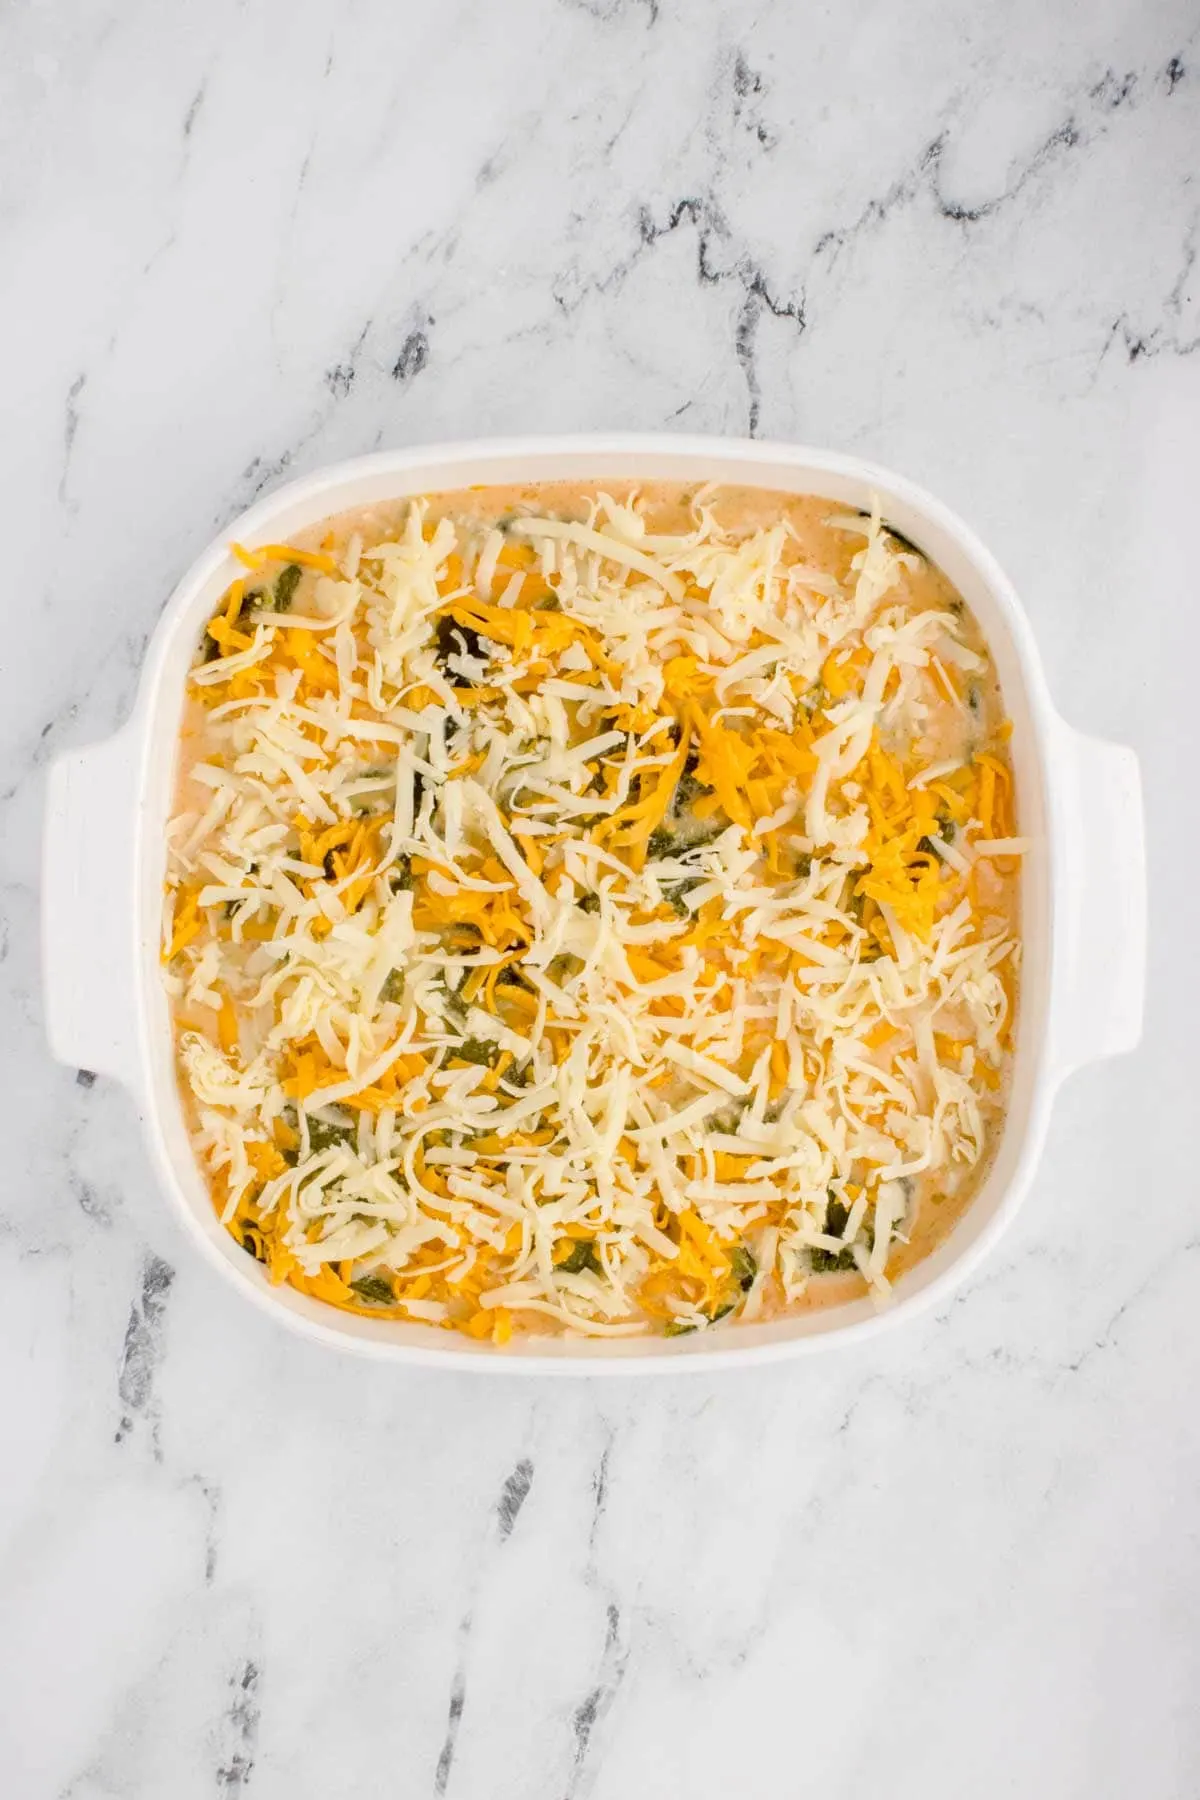 shredded cheese on top of chili relleno casserole in a baking dish